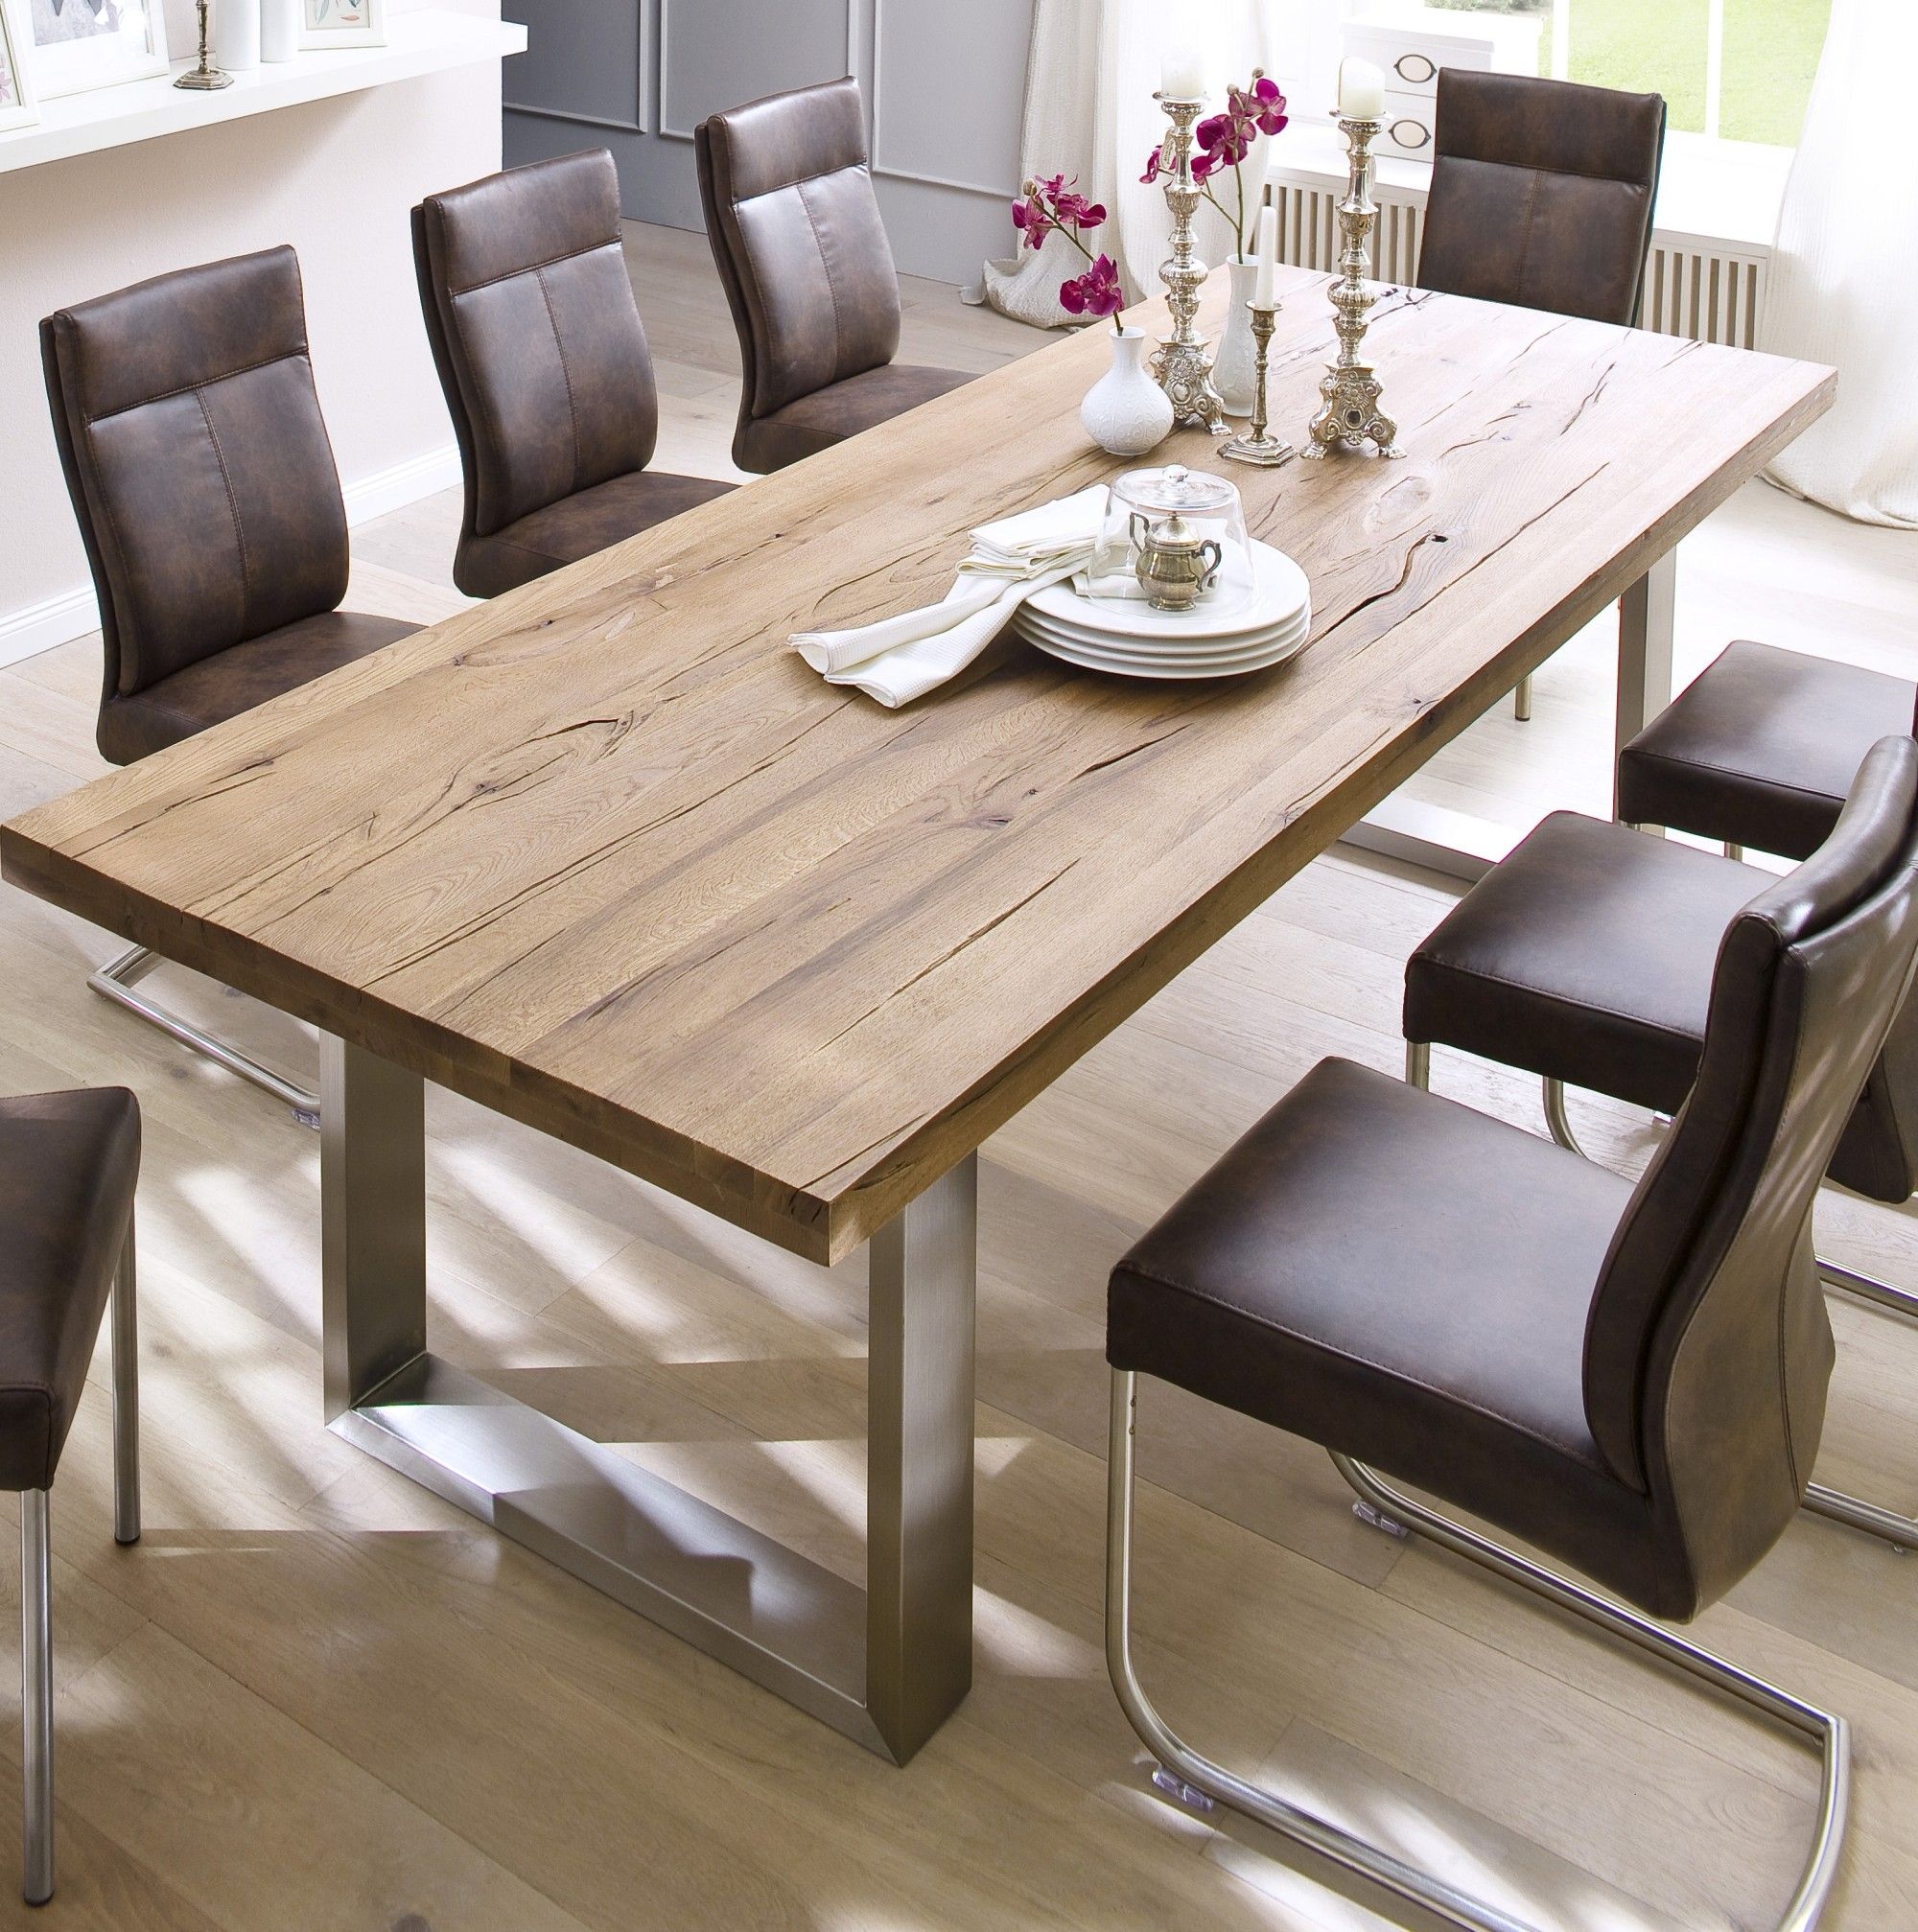 Wild oak table cantilever leather wooden table